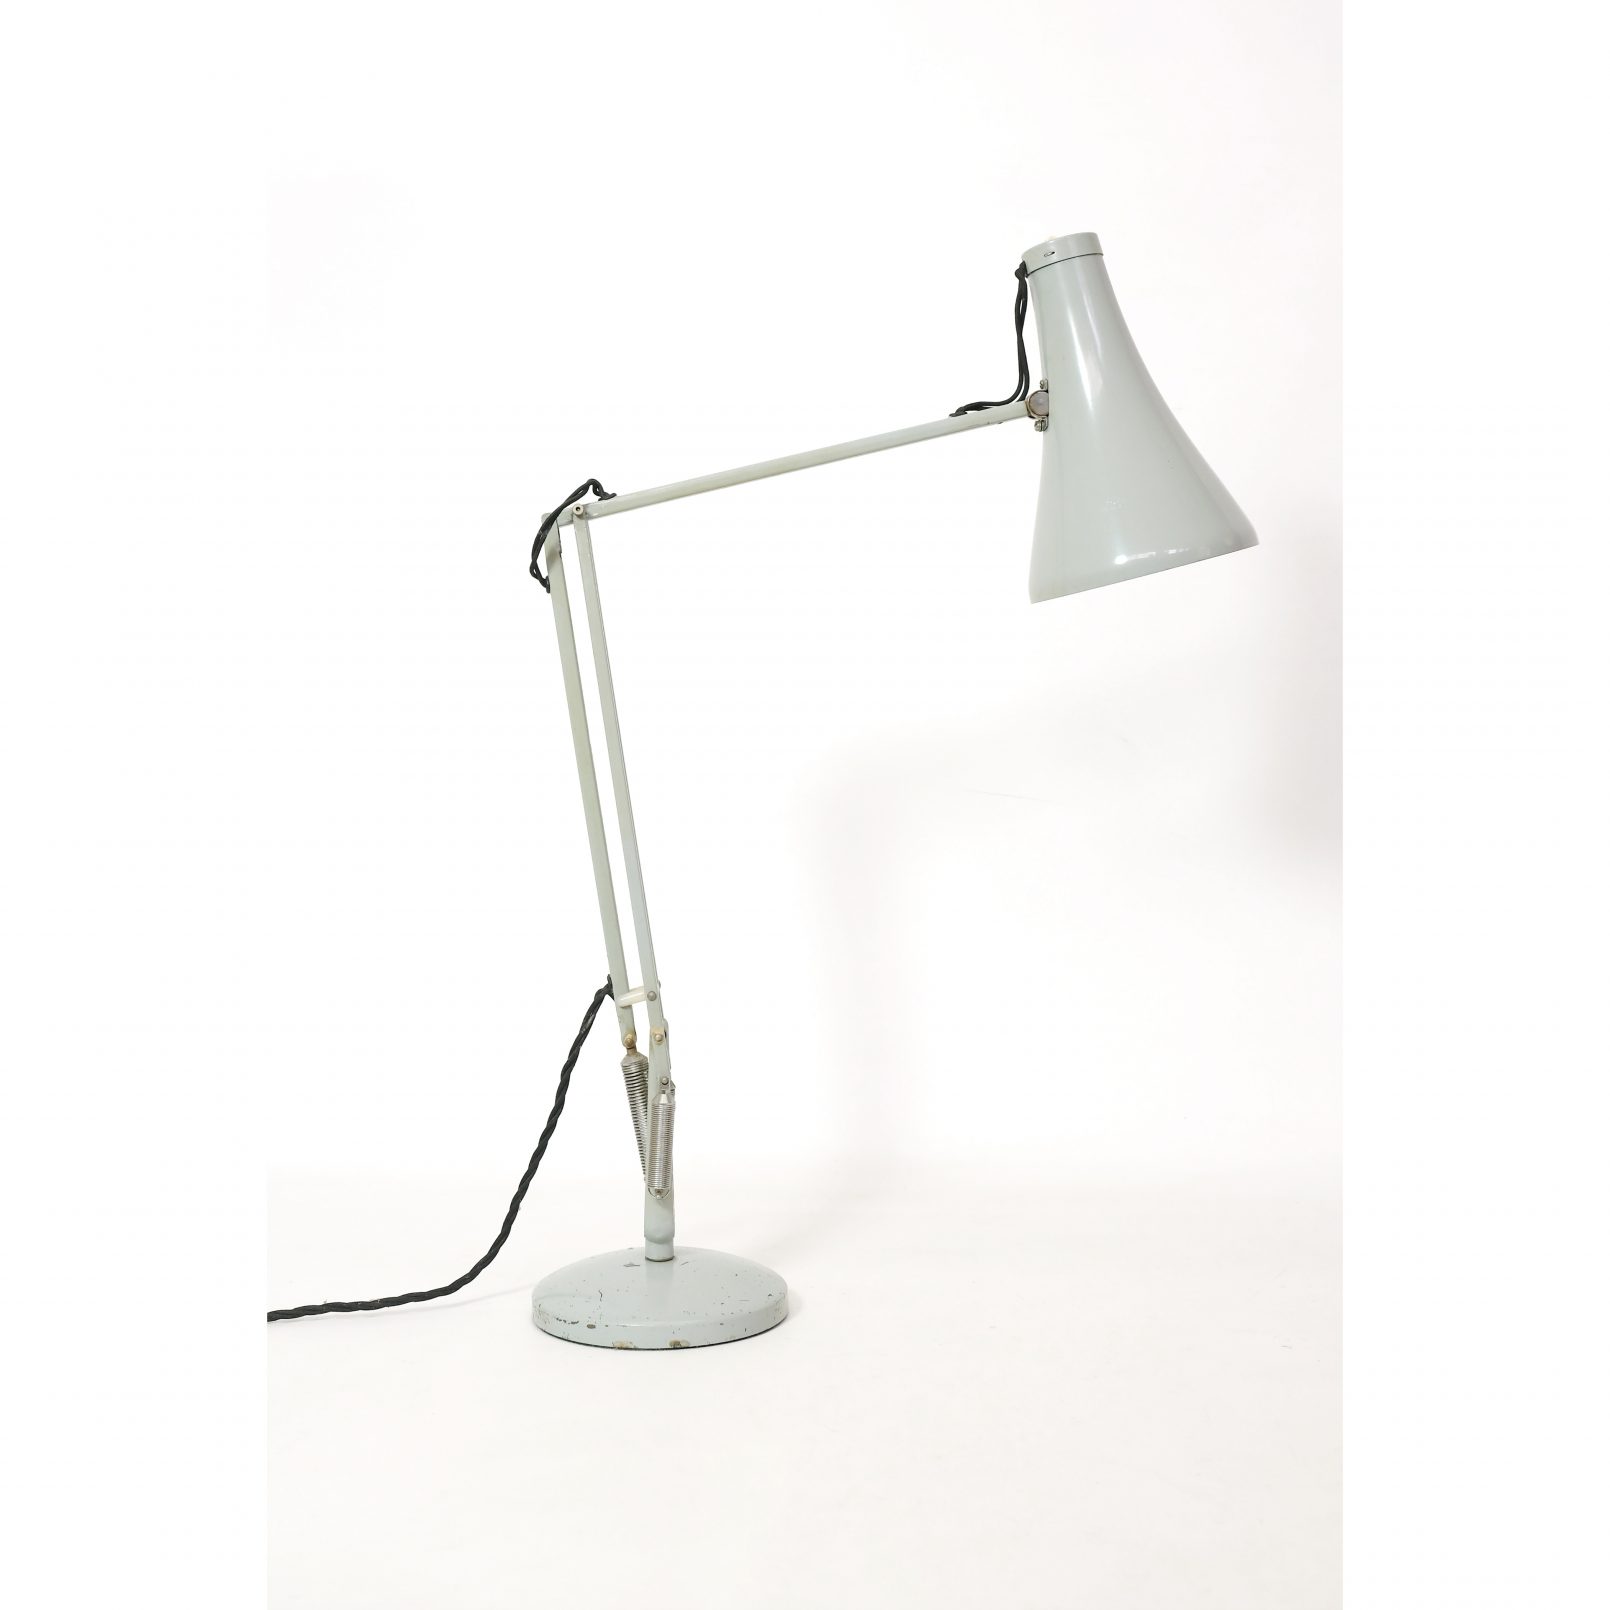 George Carwardine, Anglepoise adjustable lamp, Herbert Terry and sons, 1960s.